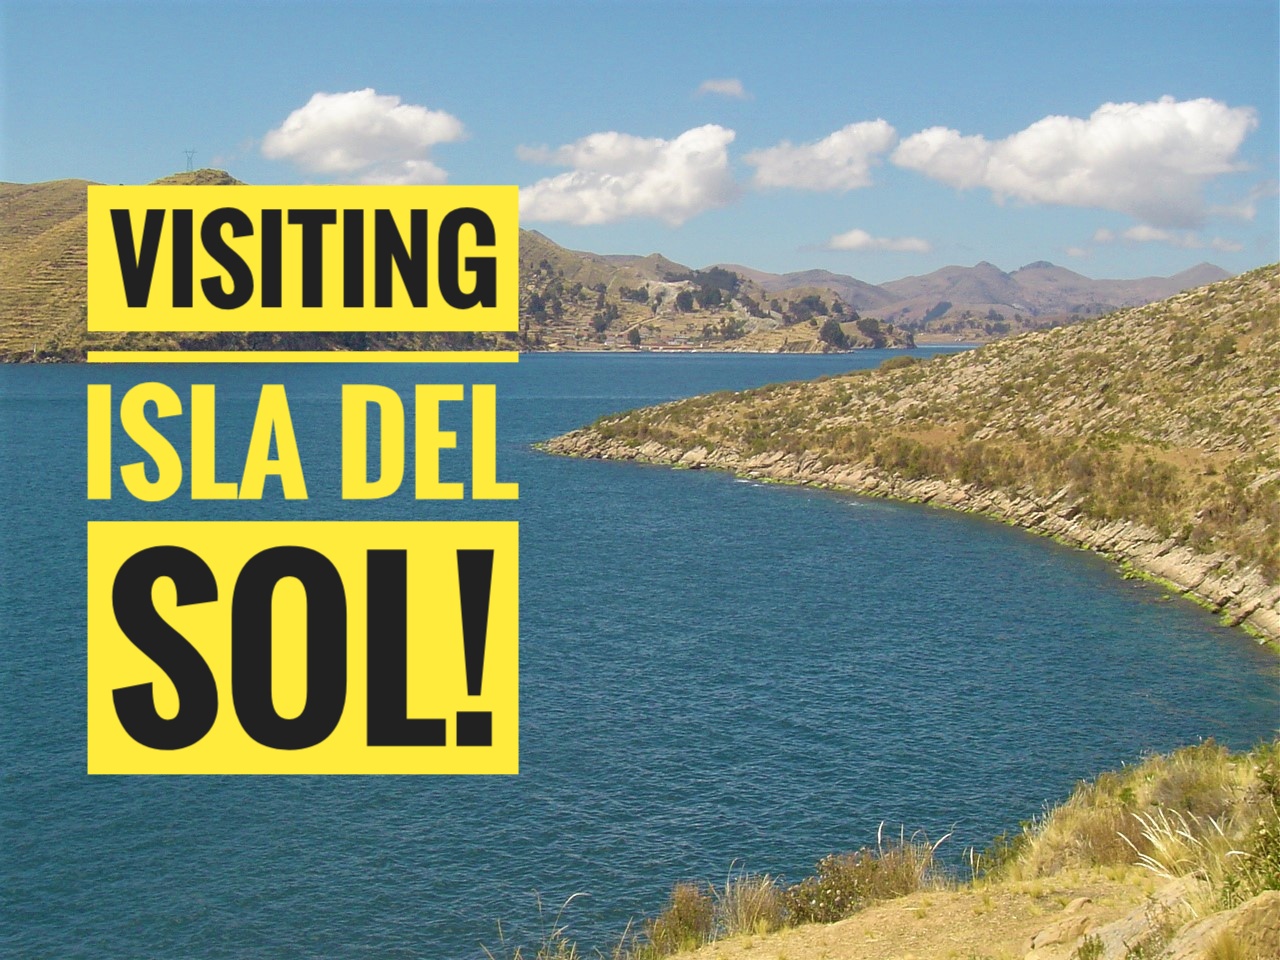 Want to visit a peaceful #island located on the highest navigable lake in the world? Then make sure to visit Isla Del Sol on Lake Titicaca! As you hike around this enchanting island, you will see beautiful rolling hills that are covered in terraced fields along with stunning views of the island & of the lake. It’s one of the many Treasures Of Traveling in Bolivia South America!